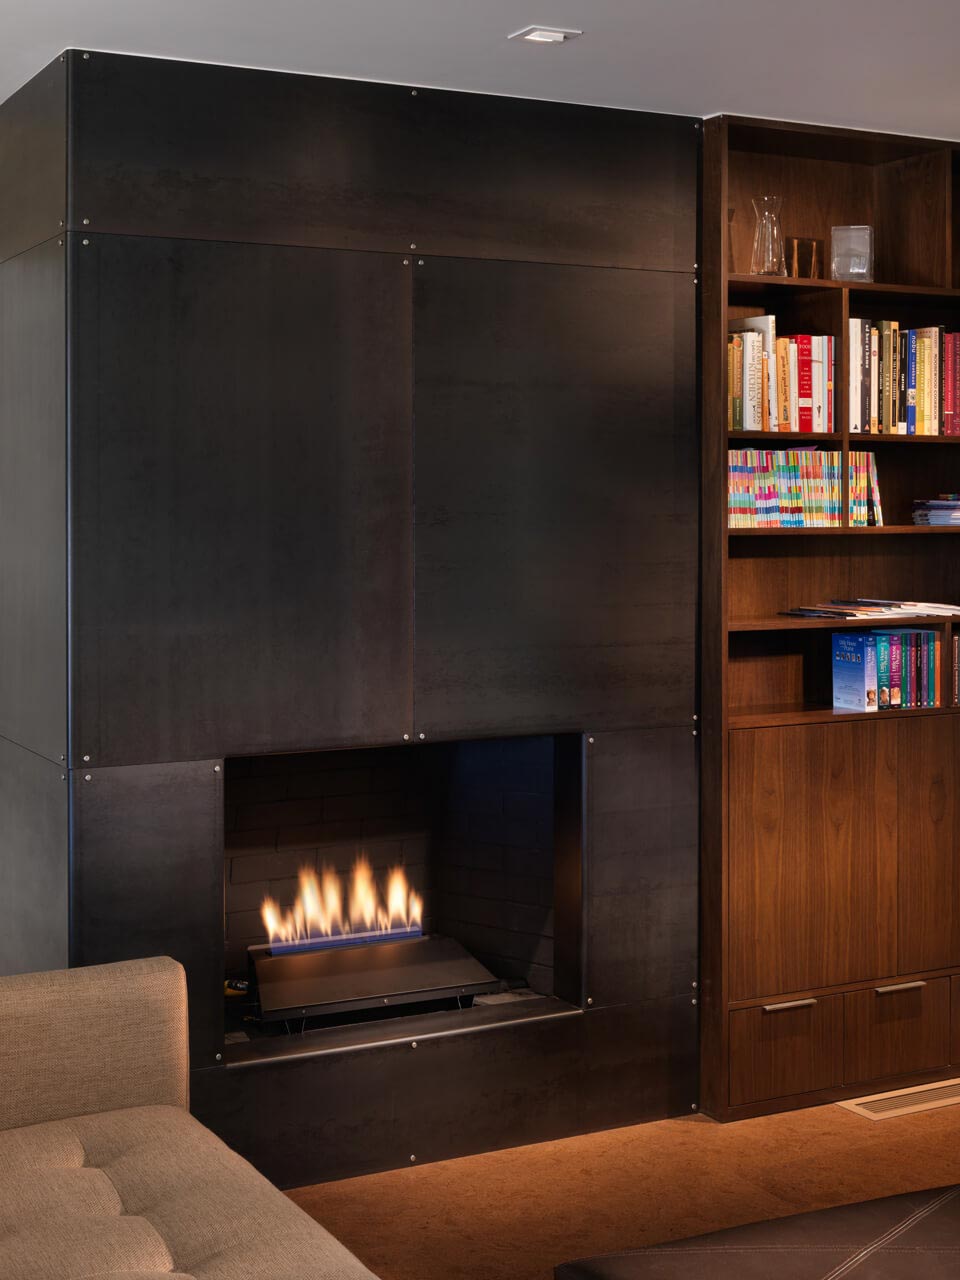 a fireplace in a room